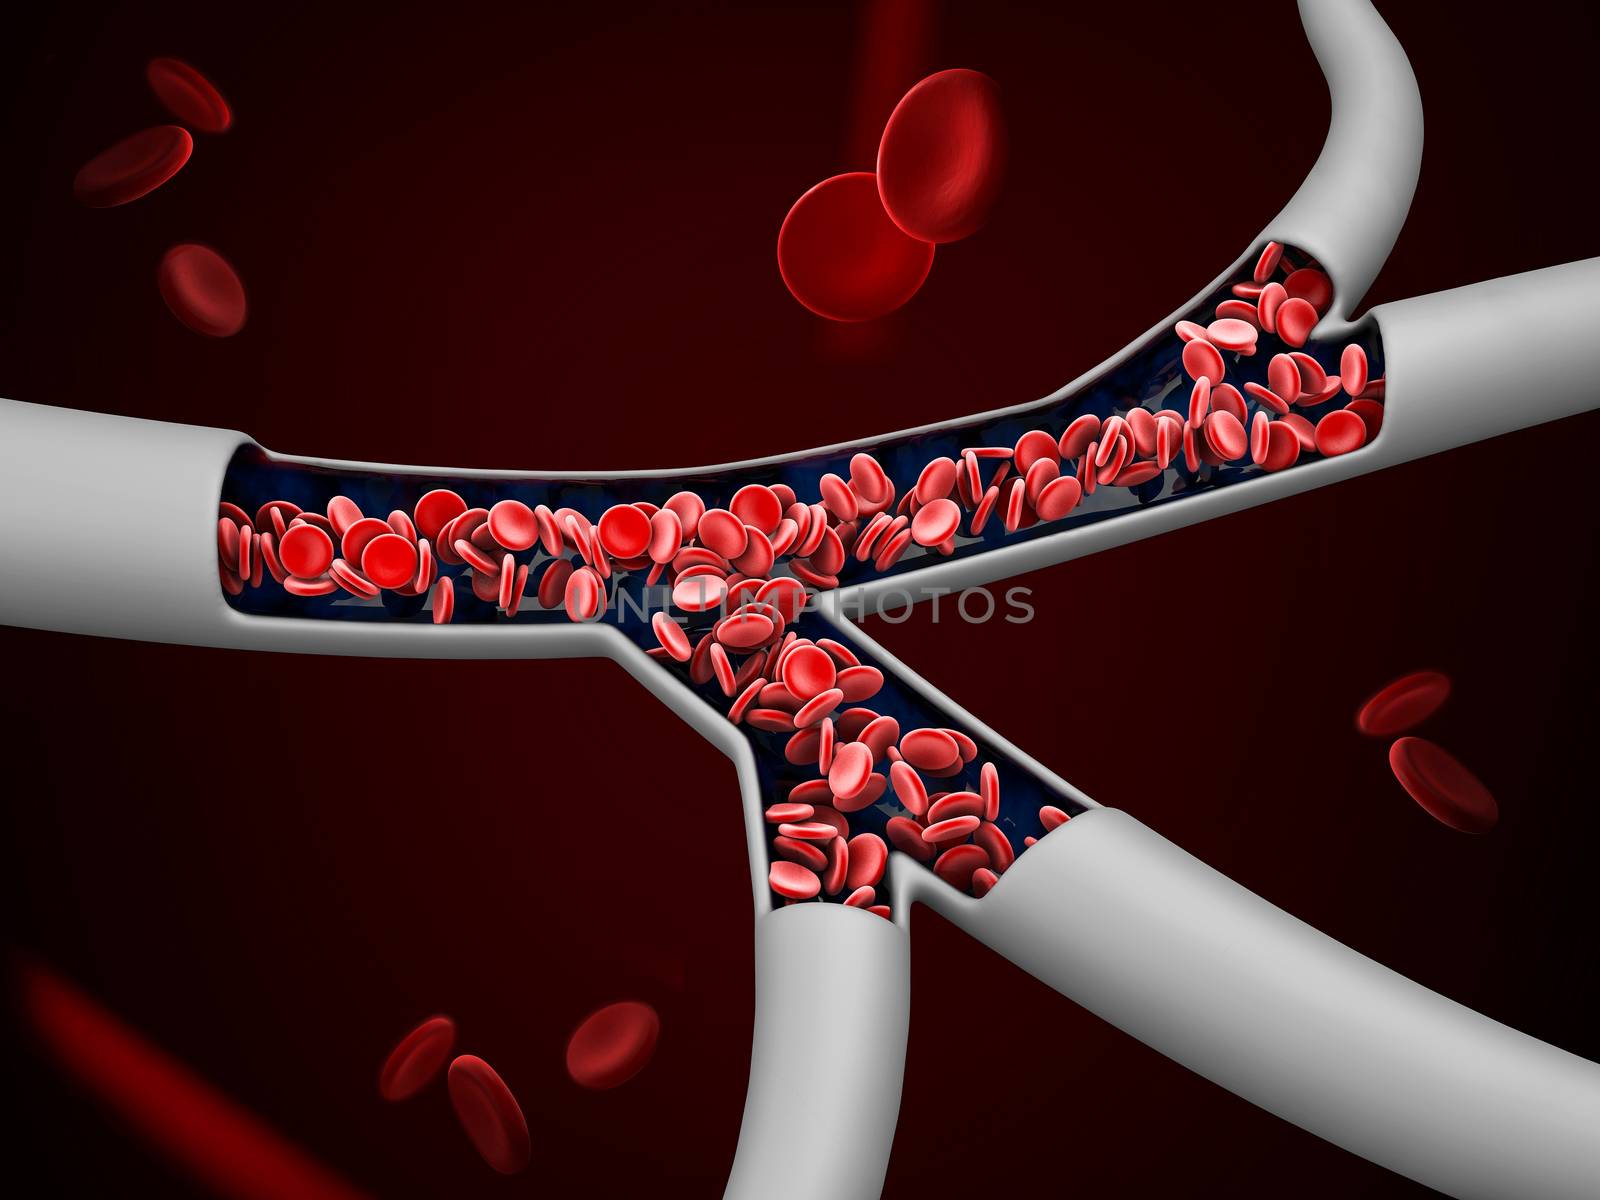 3d Illustration of red blood cells in vein, clipping path included.